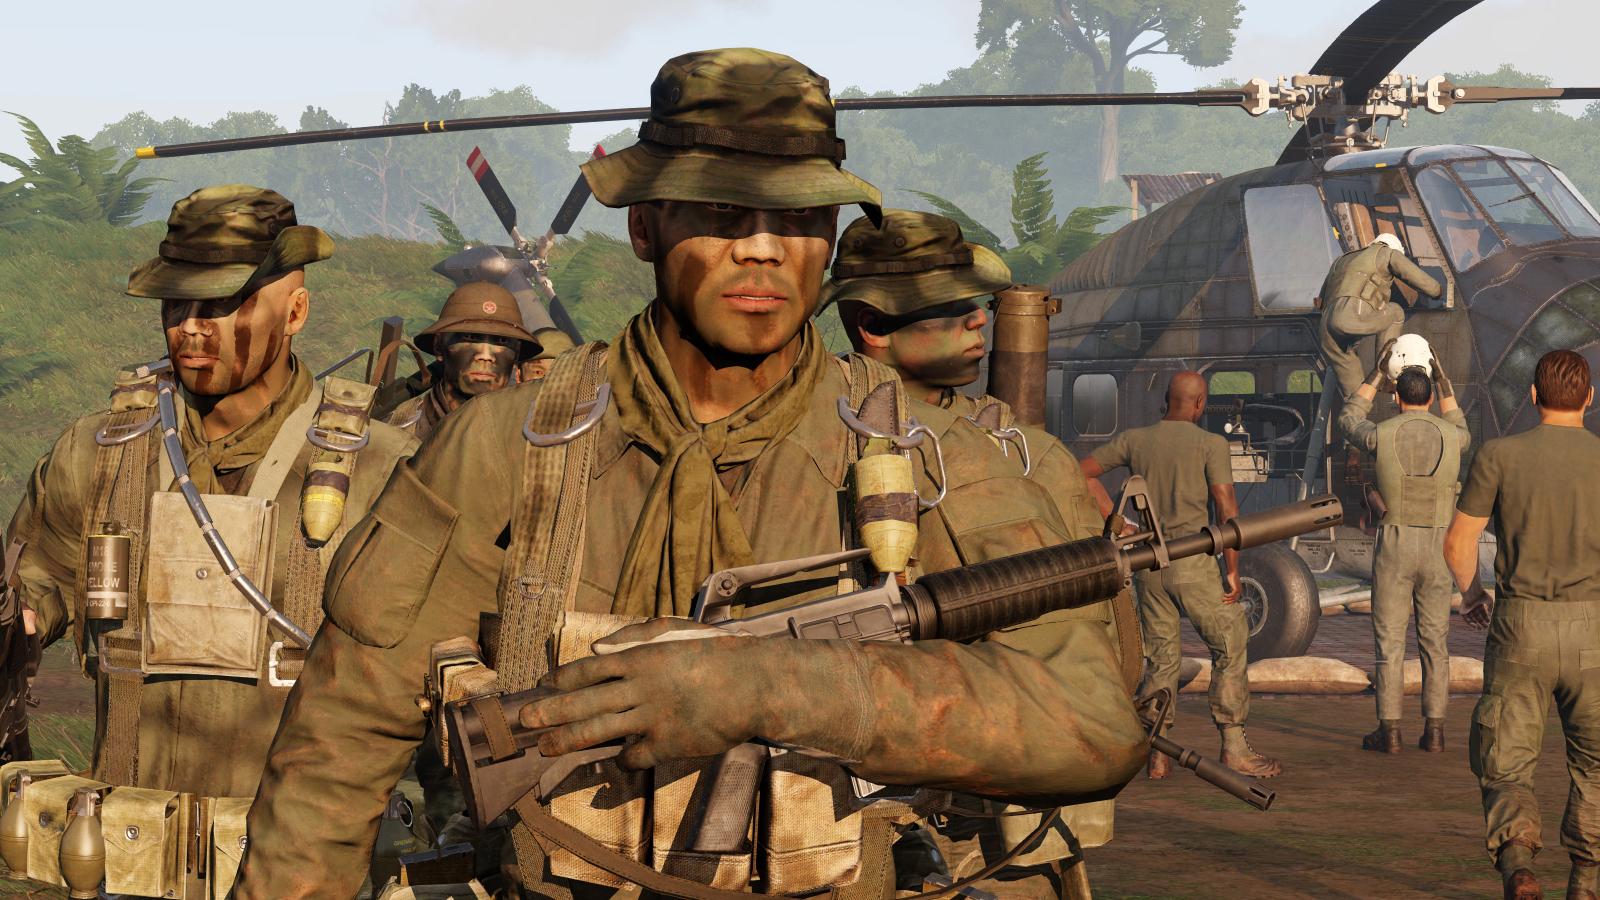 What platforms will Arma Reforger be available on? Xbox